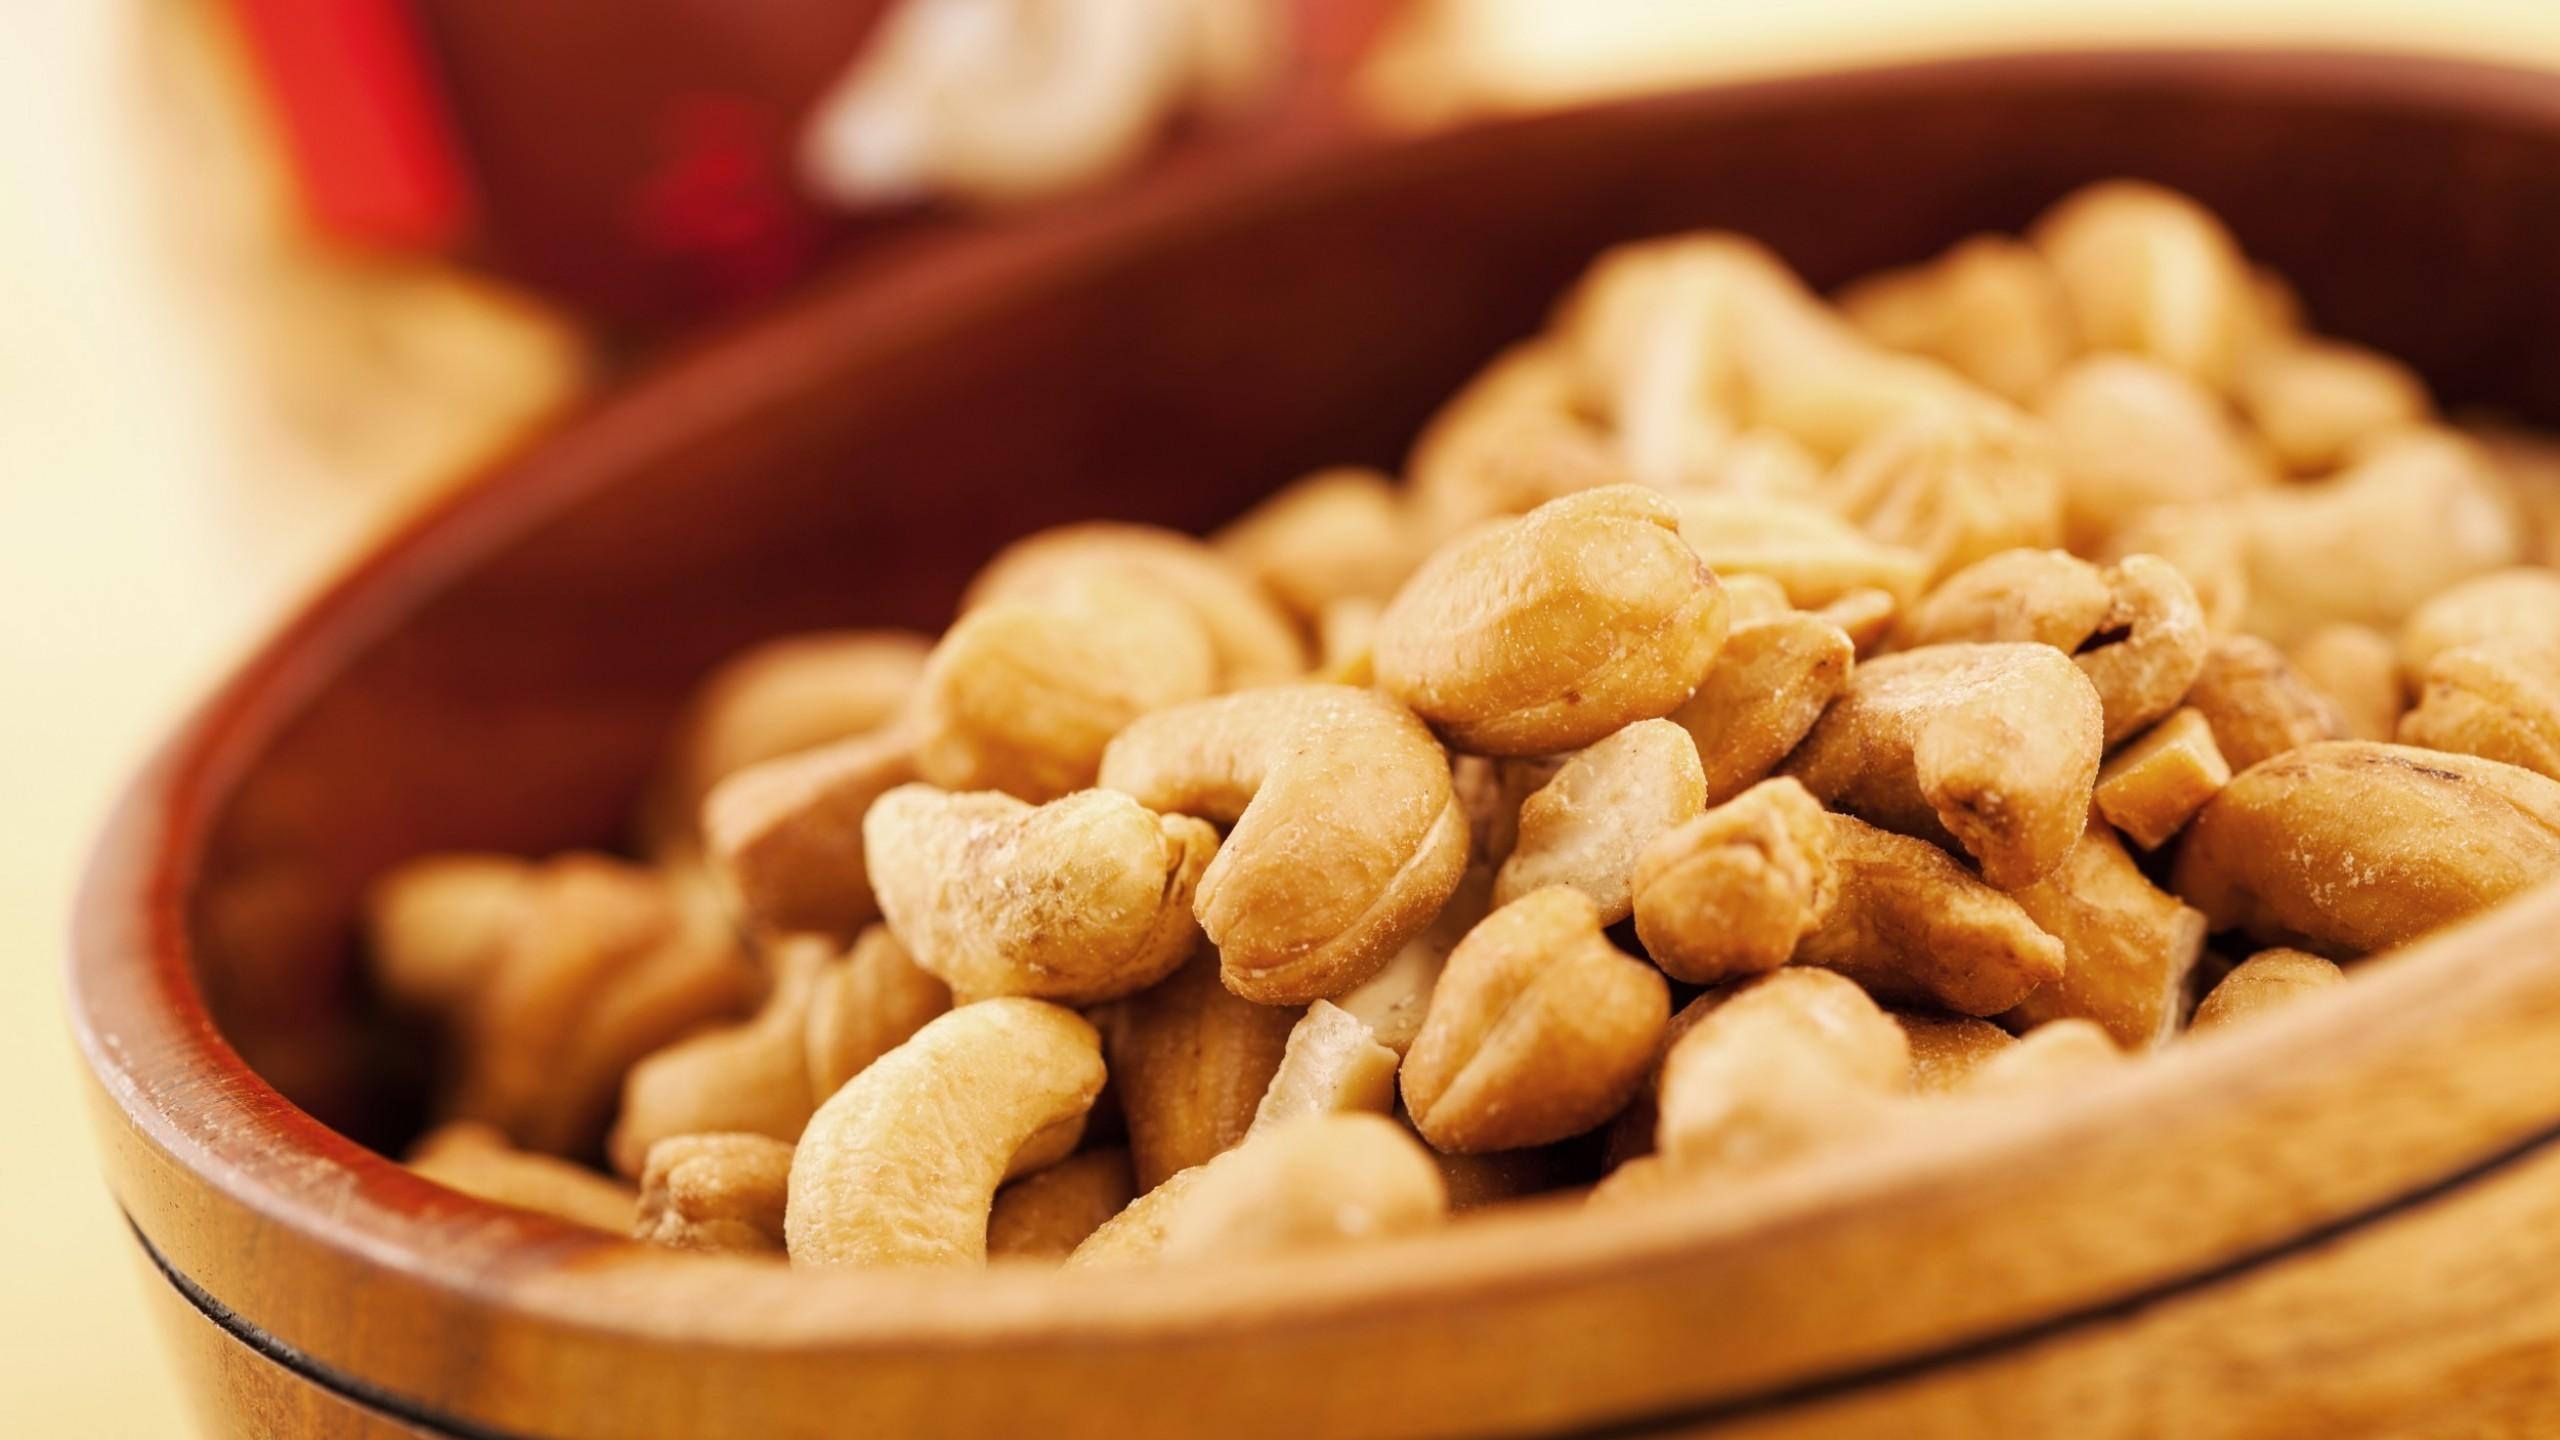 Cashew Nuts: Rich in oil and distinctively flavored, A premium-quality protein-rich snack food. 2560x1440 HD Wallpaper.